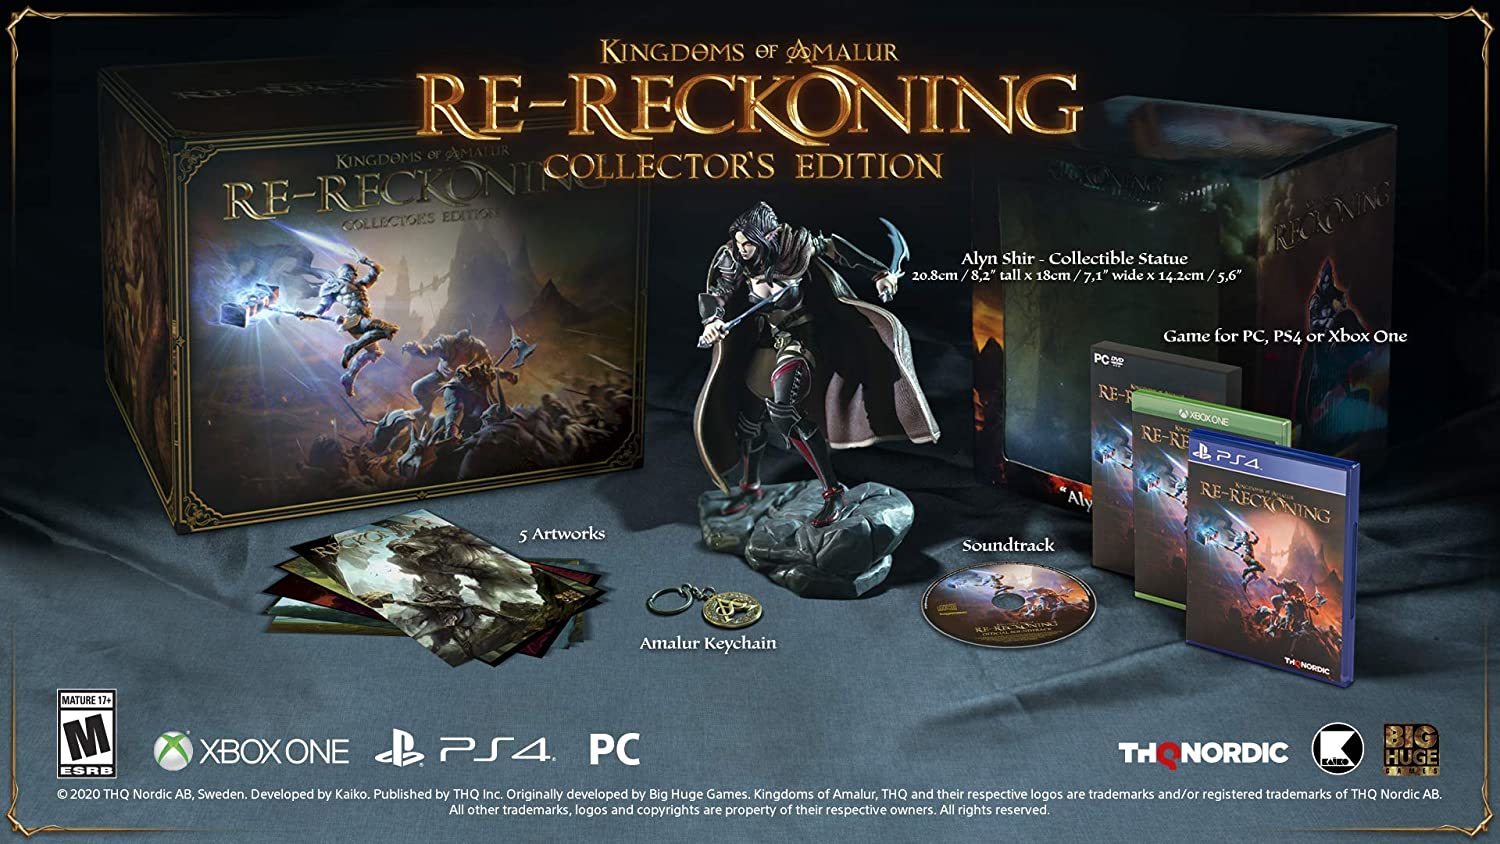 Kingdoms of Amalur Re-Reckoning Collector's Edition